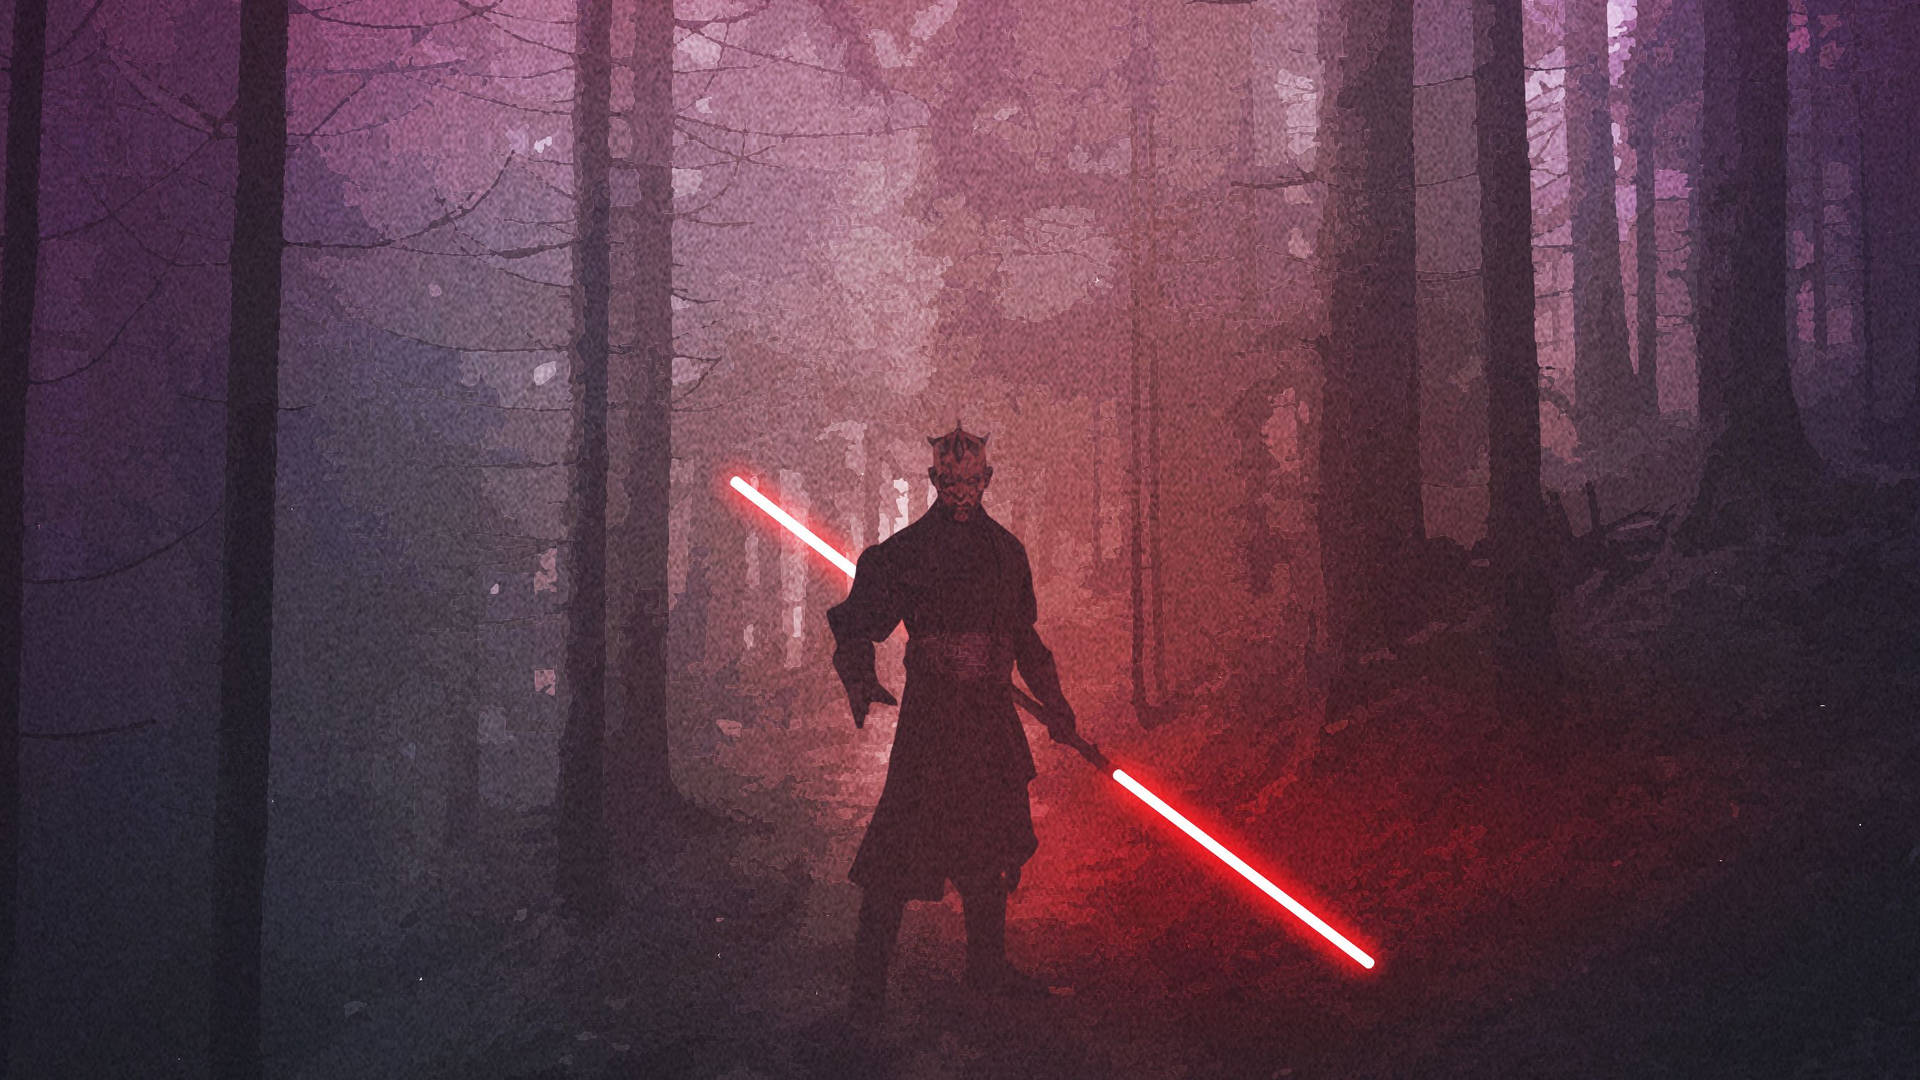 Entangled in a Lightsaber Duel, Darth Maul takes on a Superhero Wallpaper